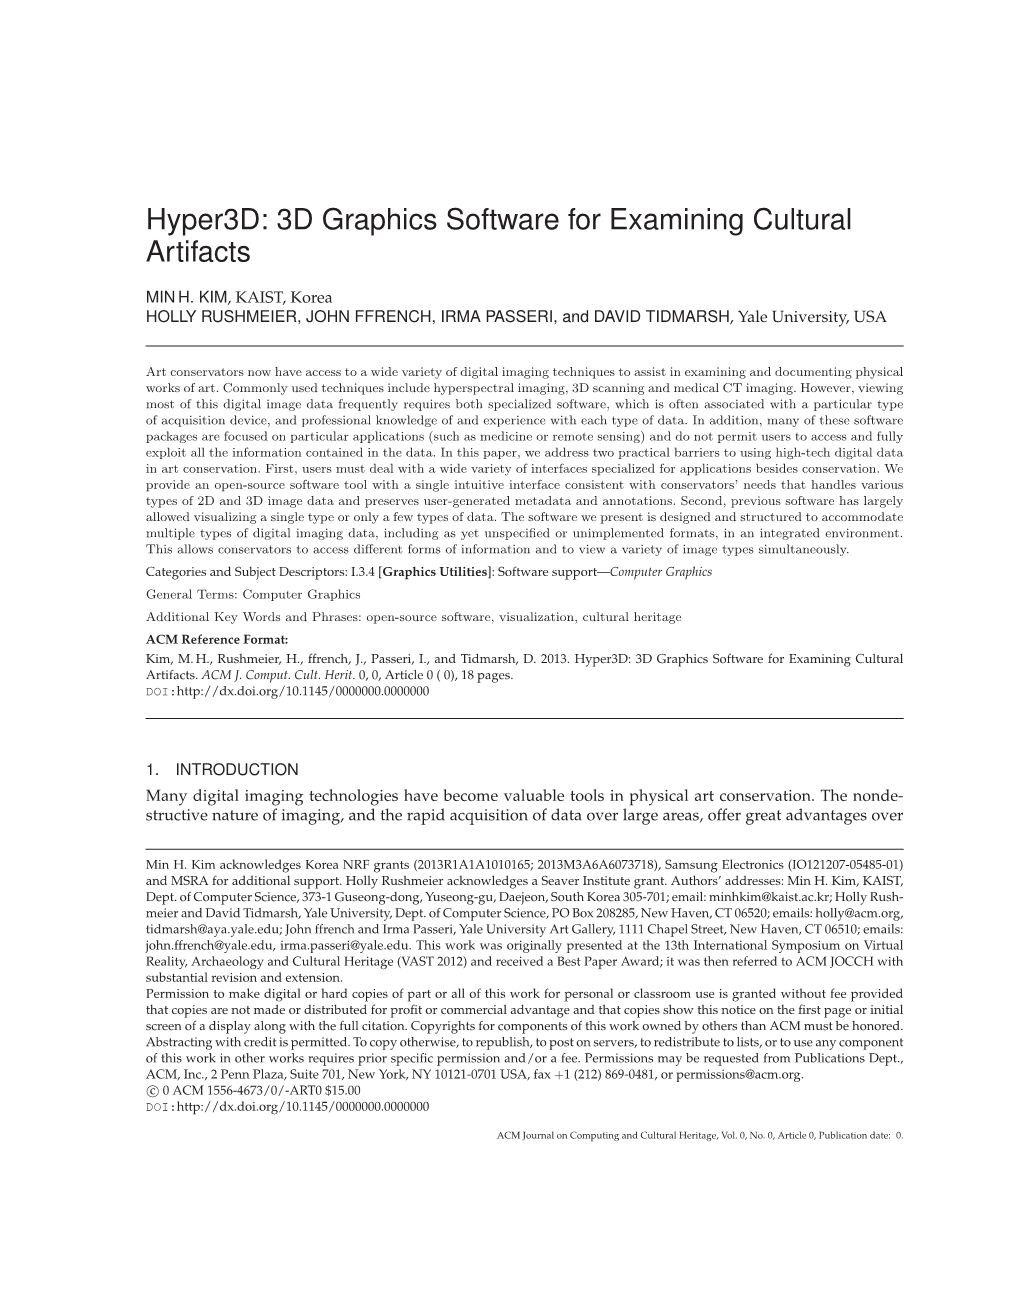 Hyper3d: 3D Graphics Software for Examining Cultural Artifacts